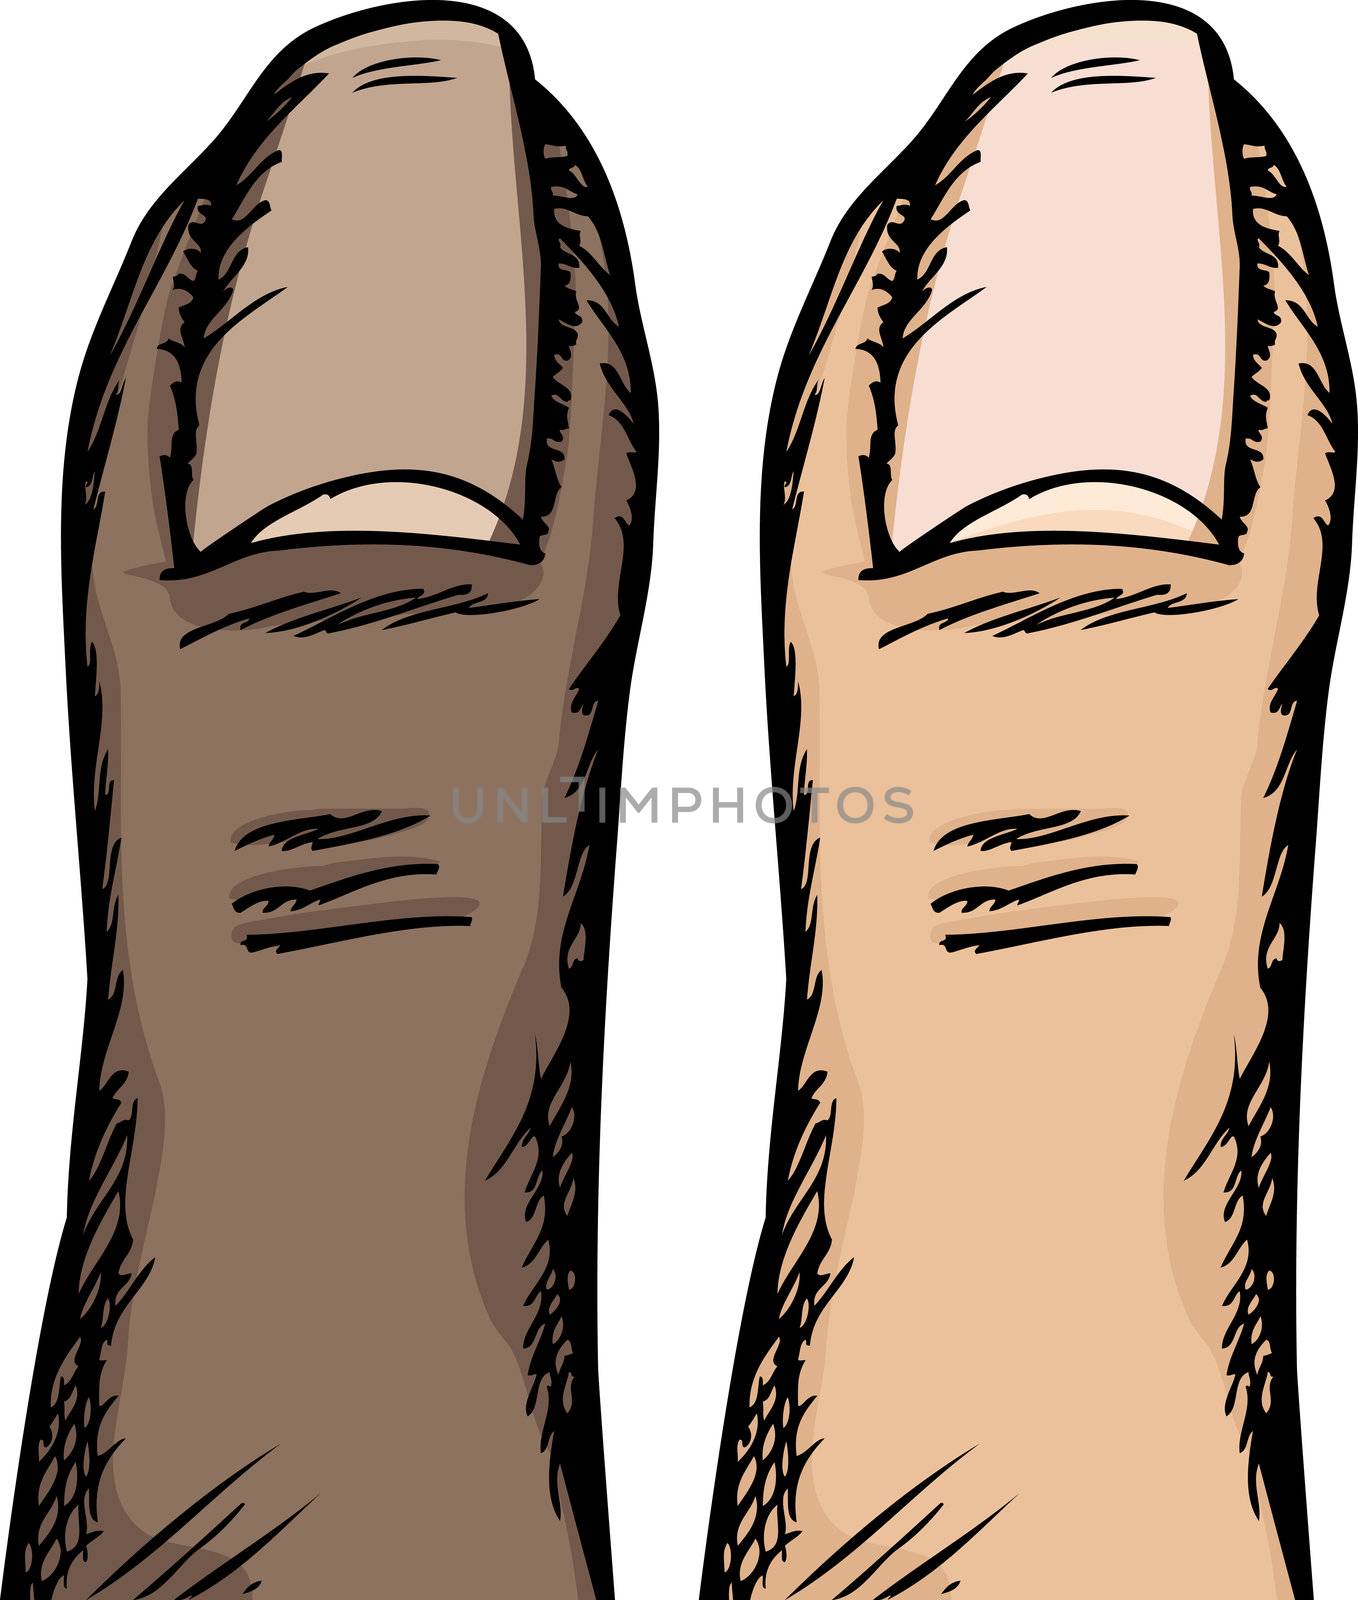 Dark and light-skinned versions of a human thumb isolated over white